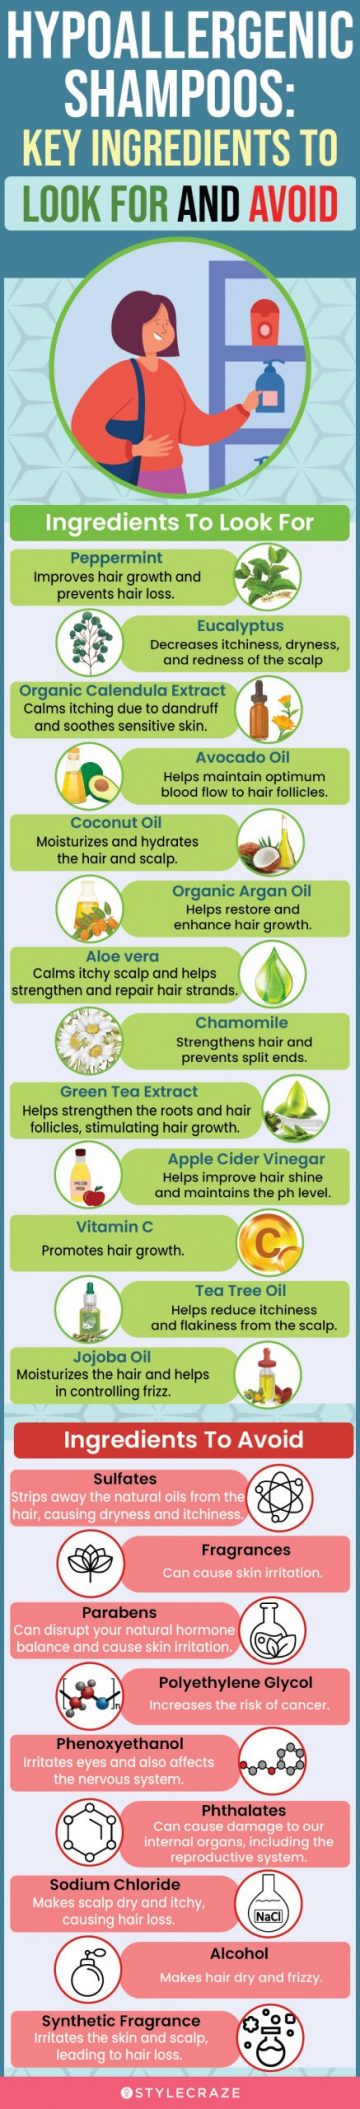 Hypoallergenic Shampoos: Key Ingredients To Look For And Avoid(infographic)